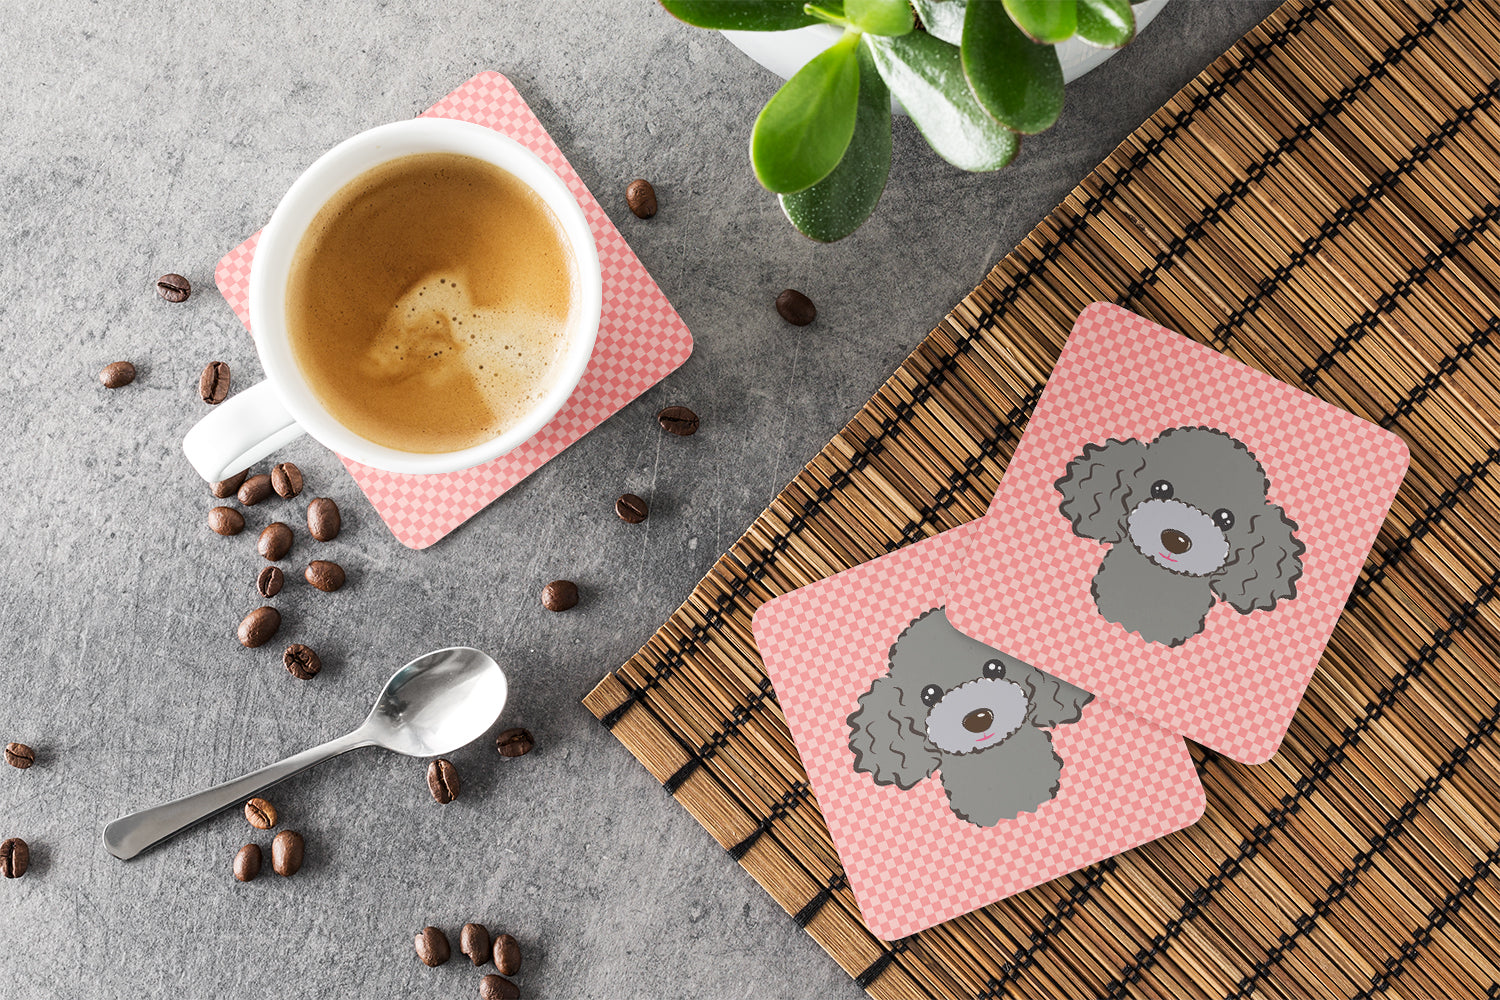 Set of 4 Checkerboard Pink Silver Gray Poodle Foam Coasters BB1259FC - the-store.com